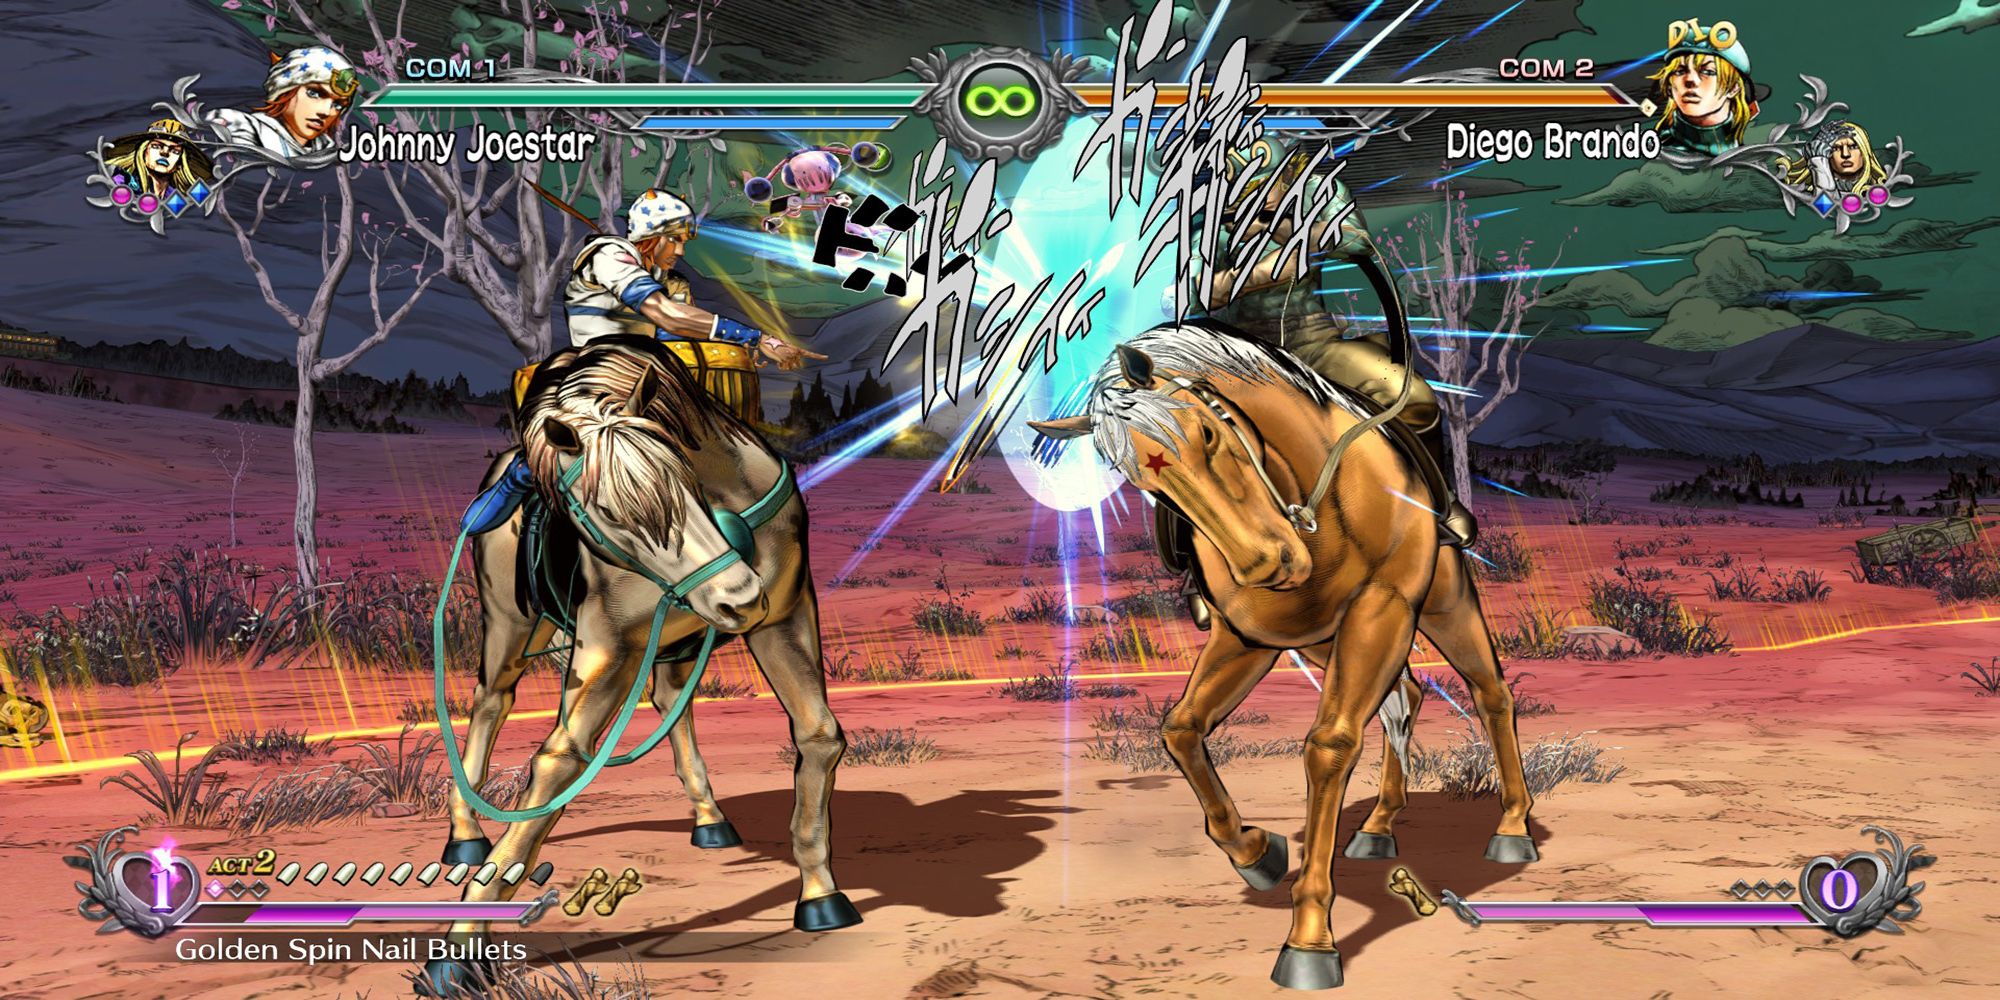 Diego's horse guards against Tusk's nail bullets during a battle at the Philadelphia Seaside in JoJo's Bizarre Adventure ASBR.